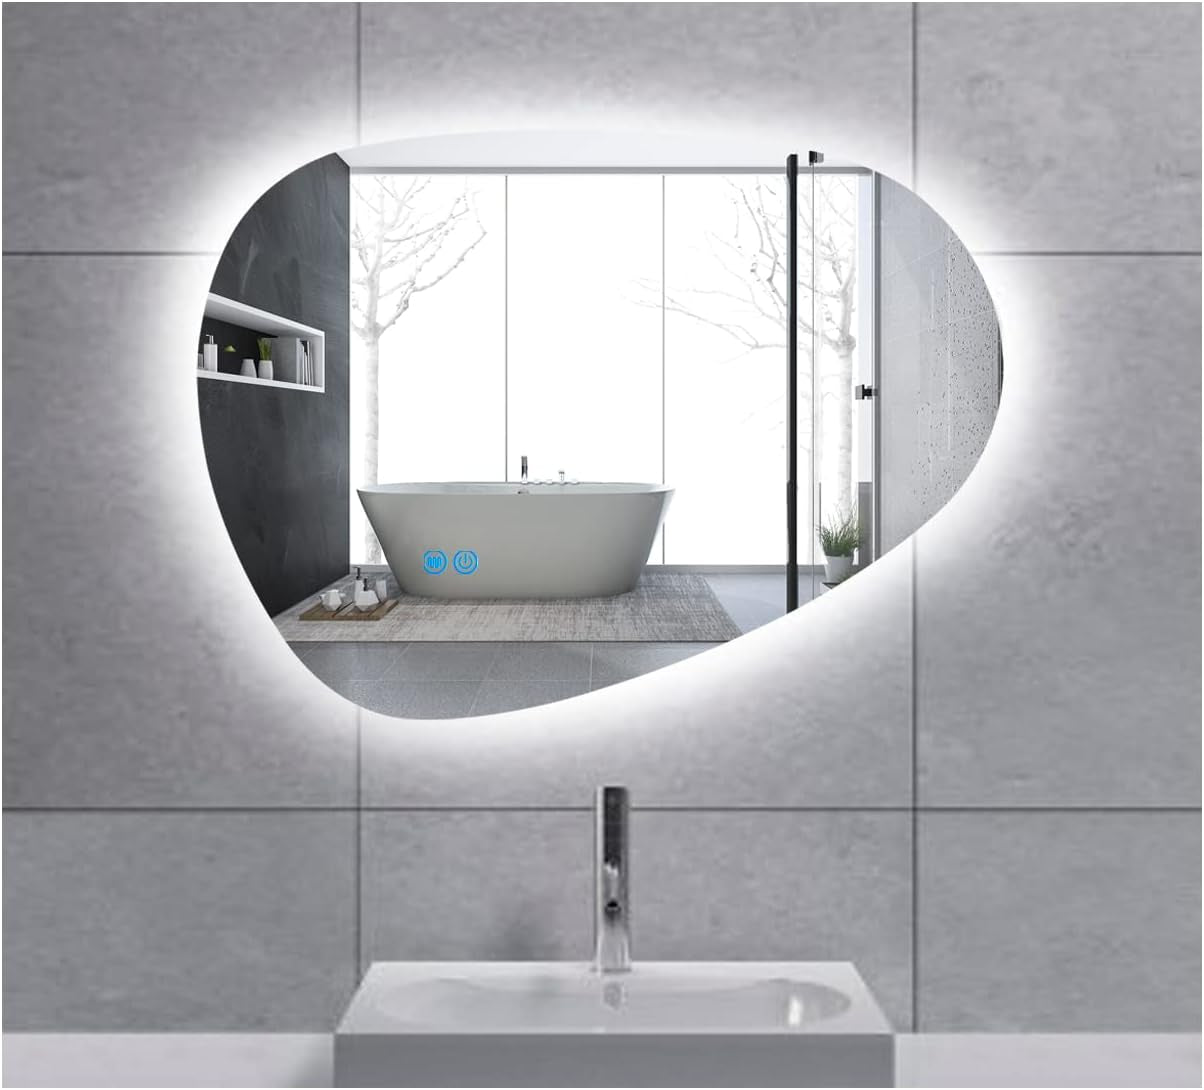 Bathroom Wall Mounted LED Mirror, Irregular Shape Frameless Design, 24 L X 32 W, Defogger Function, Dimmable Vanity Mirror, Waterproof, Adjustable LED Color, Touch Sensor, Anti-Fog Feature